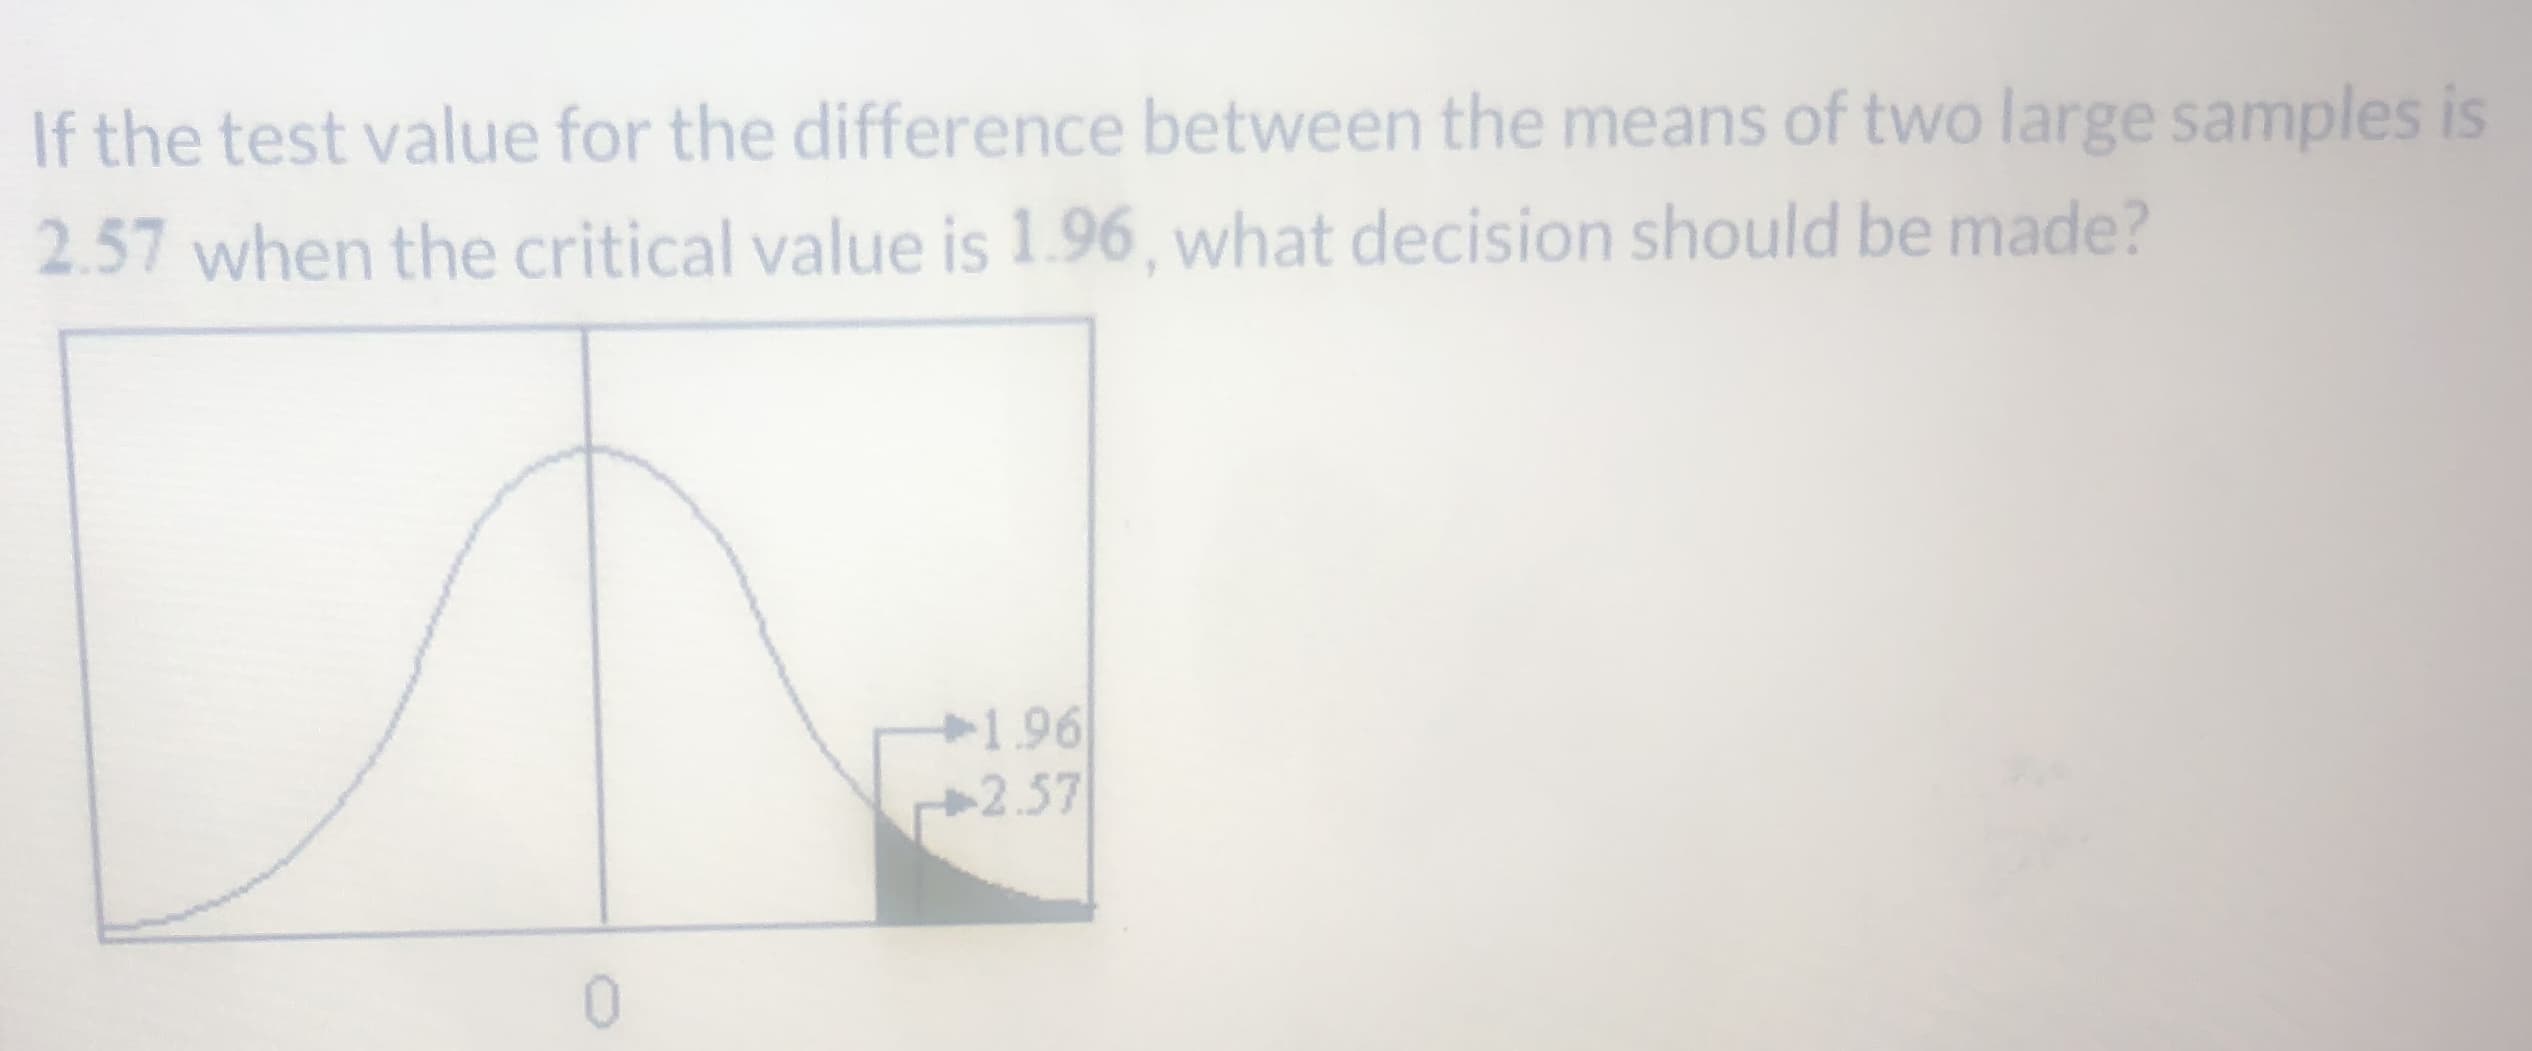 If the test value for the difference between the means of two large samples is
2.57 when the critical value is 1.96, what decision should be made?
1.96
2.57
